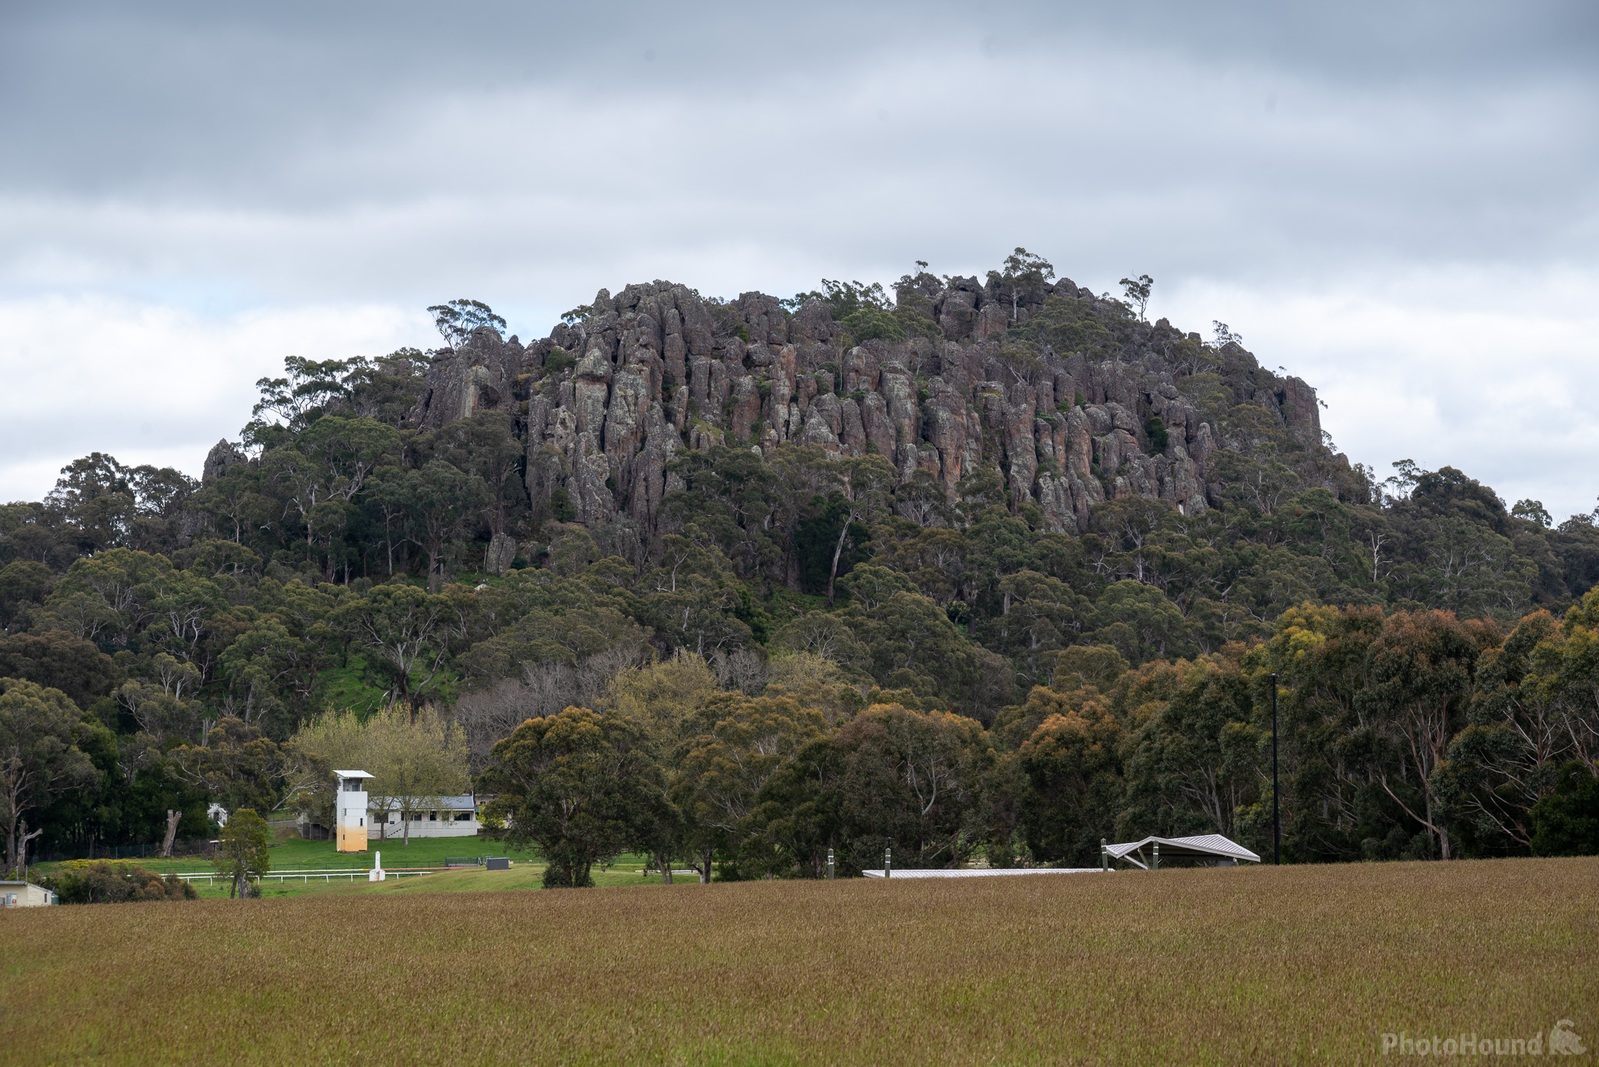 Image of Hanging Rock Victoria Australia by Ian Slingsby